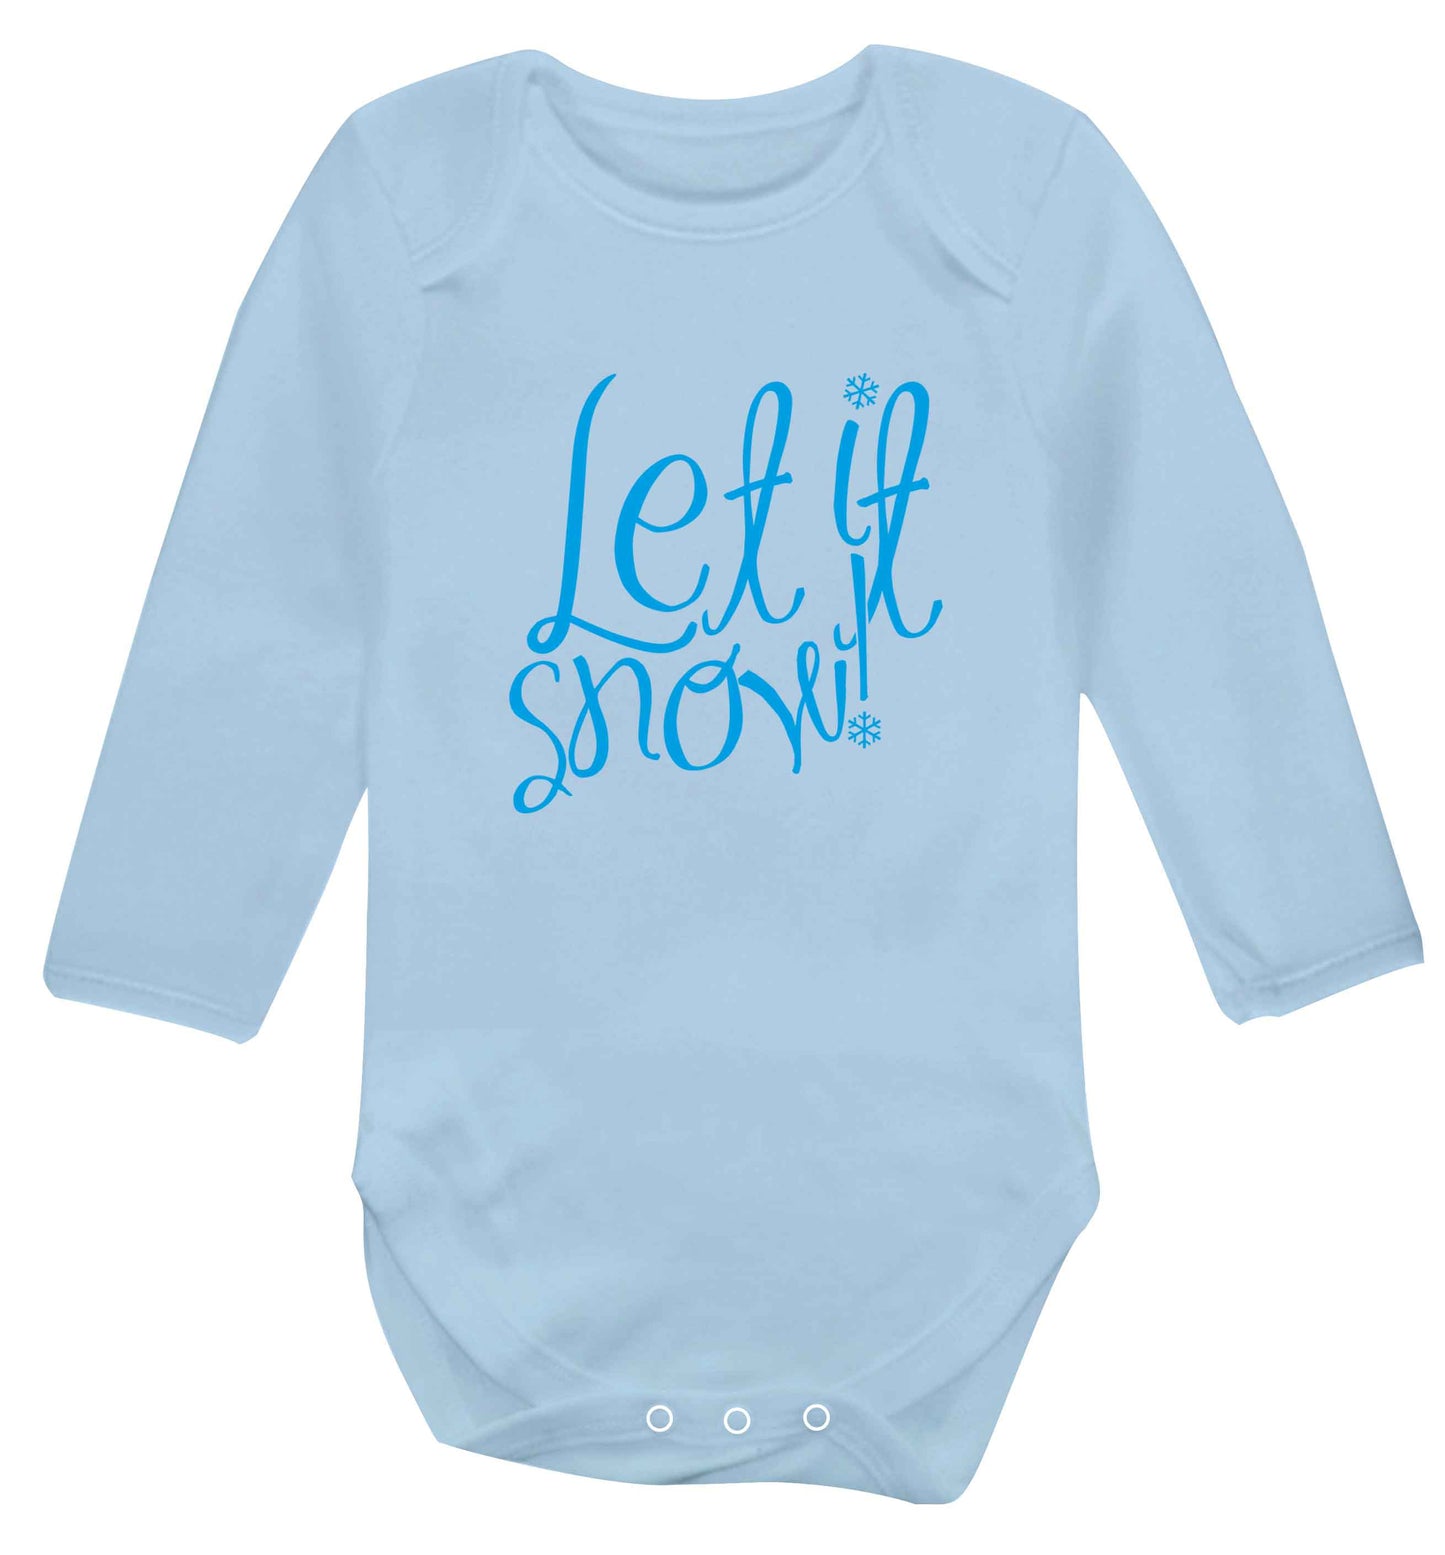 Let it snow baby vest long sleeved pale blue 6-12 months